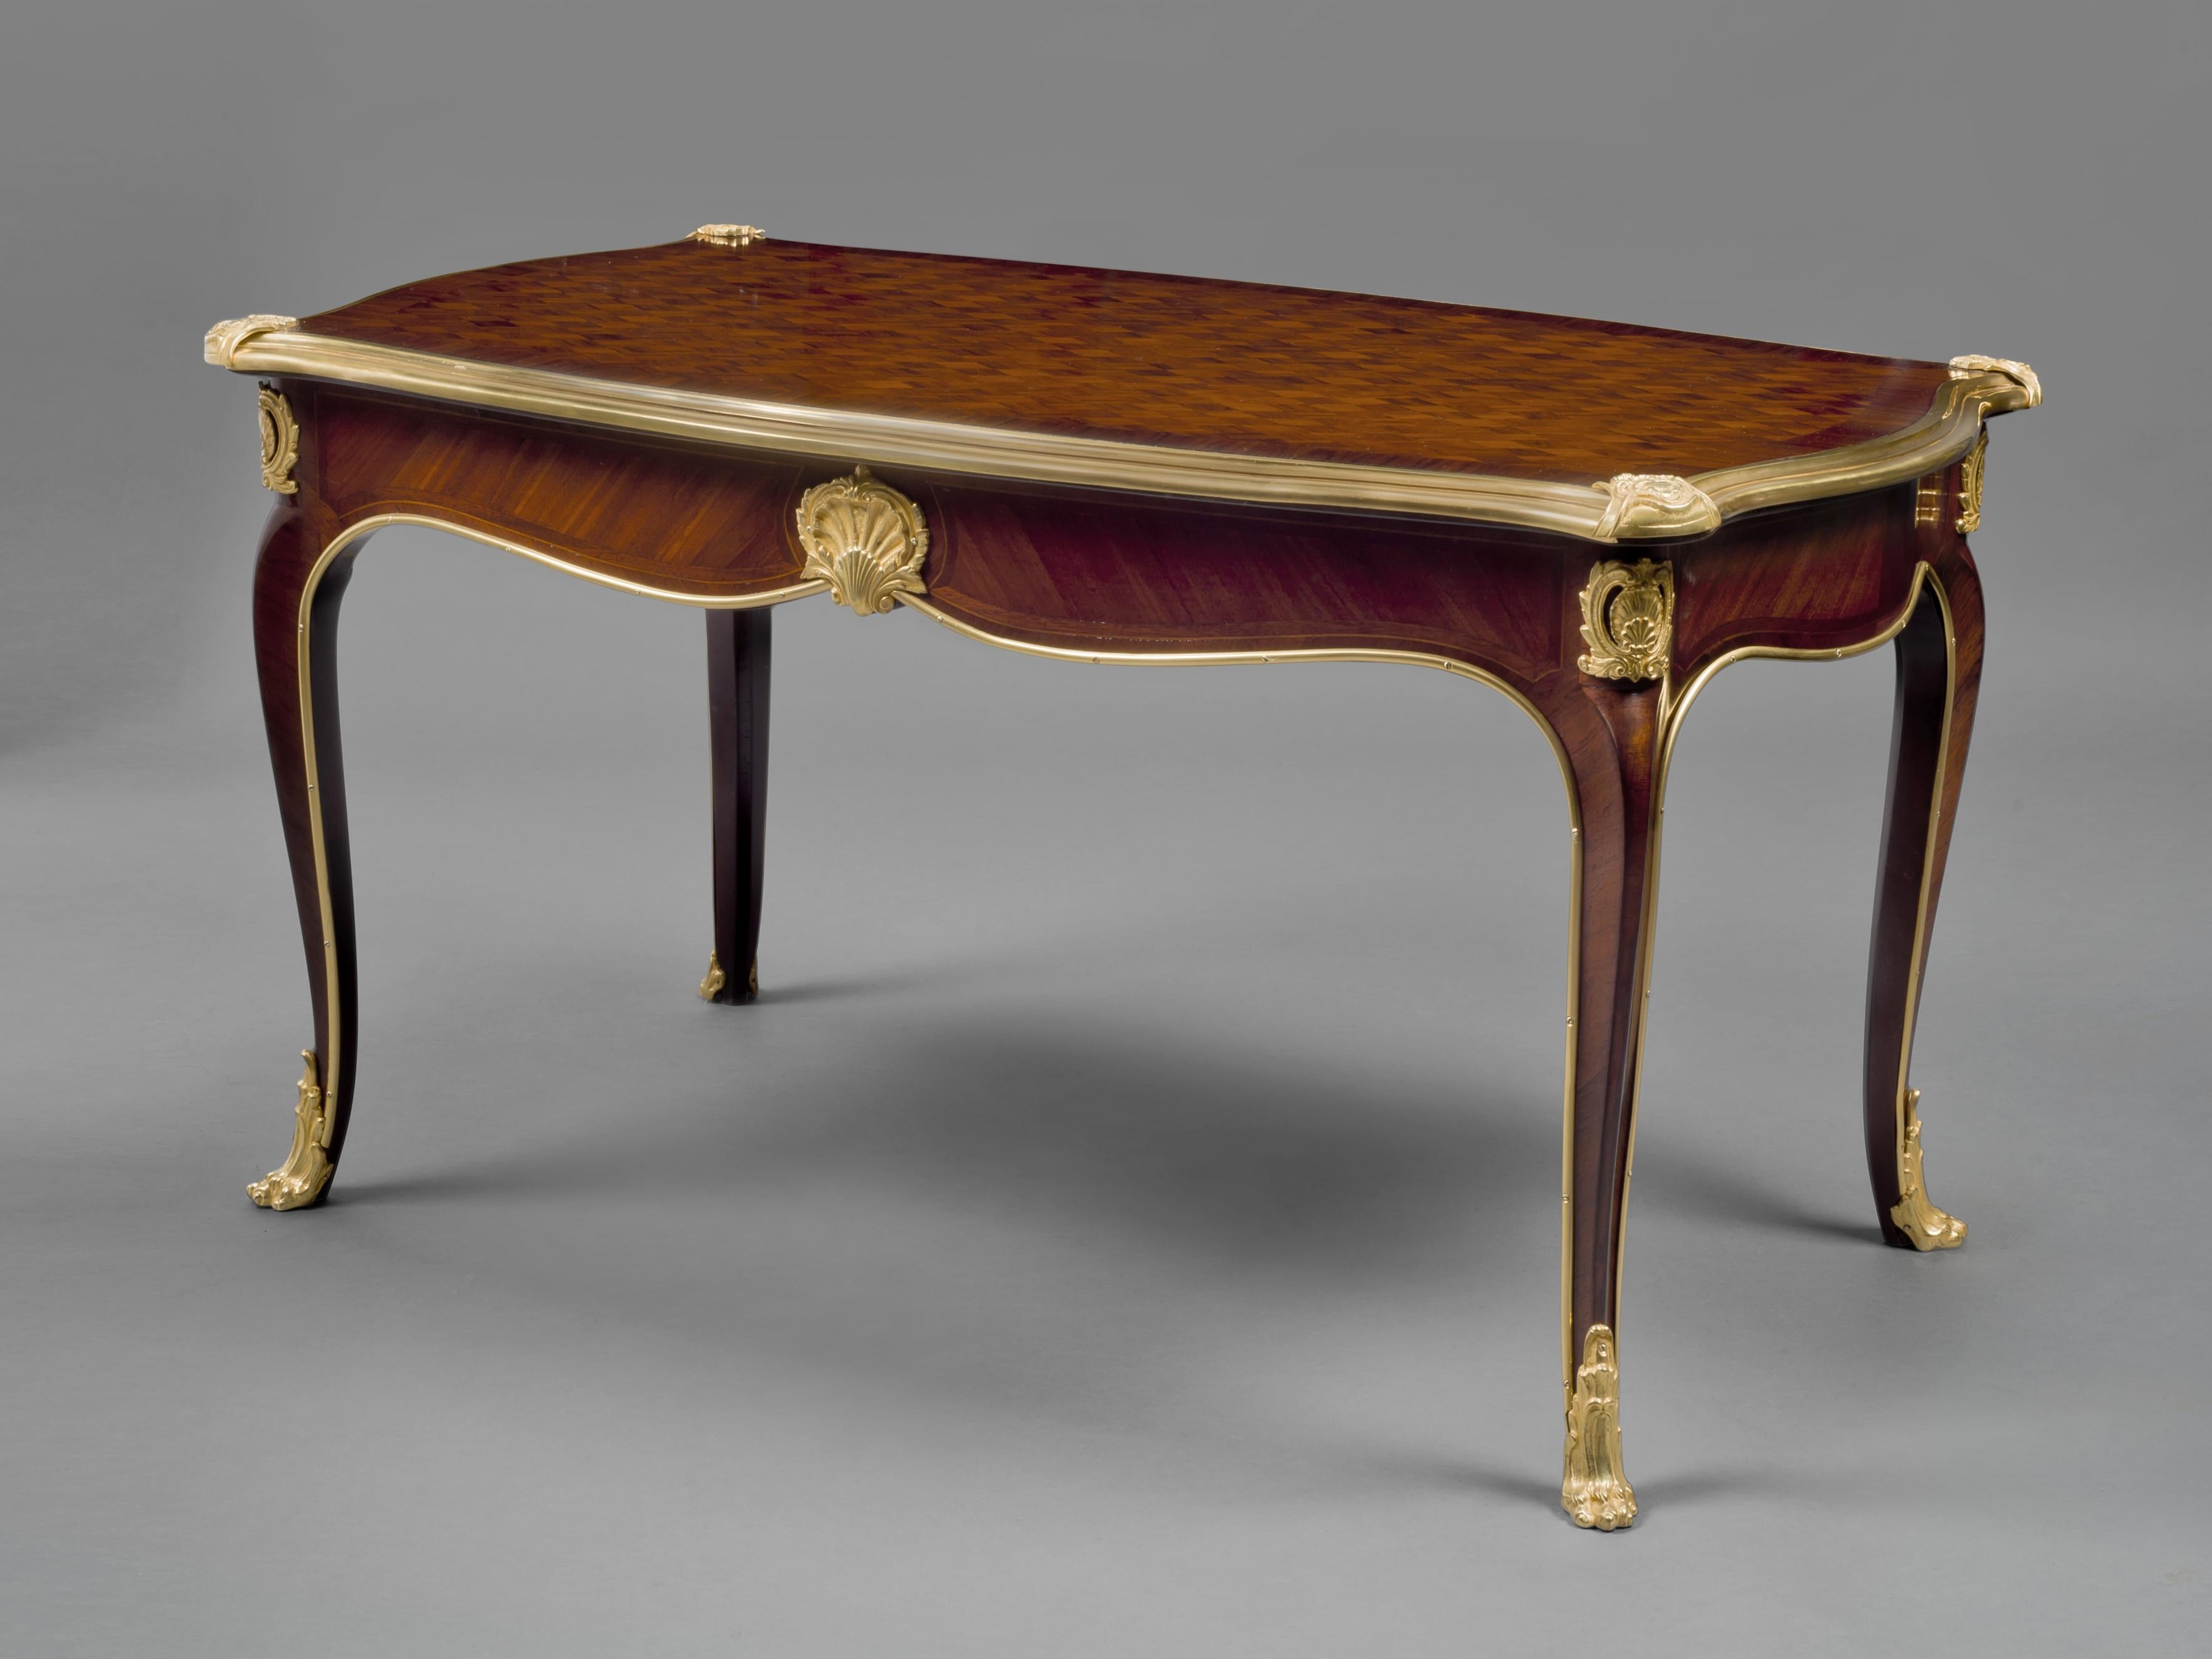 A Louis XV style low table by Lysberg and Hansen of Copenhagen.

Danish, circa 1910.

The Copenhagen firm of Lysberg & Hansen and later Lysberg, Hansen & Therp A/S, was an important Danish furniture maker and upholstery company holding both